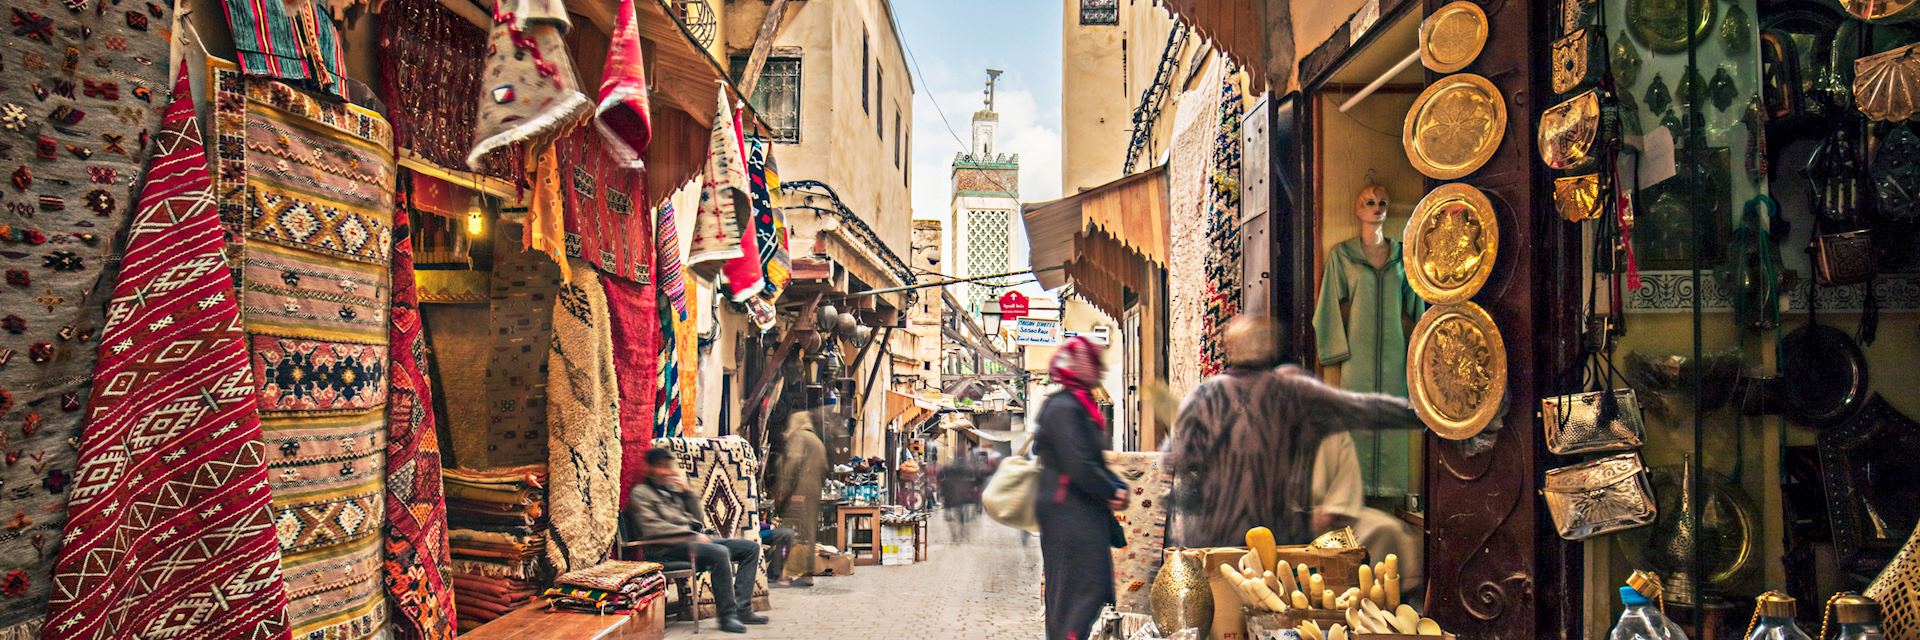 Stores in the medina streets of Fez